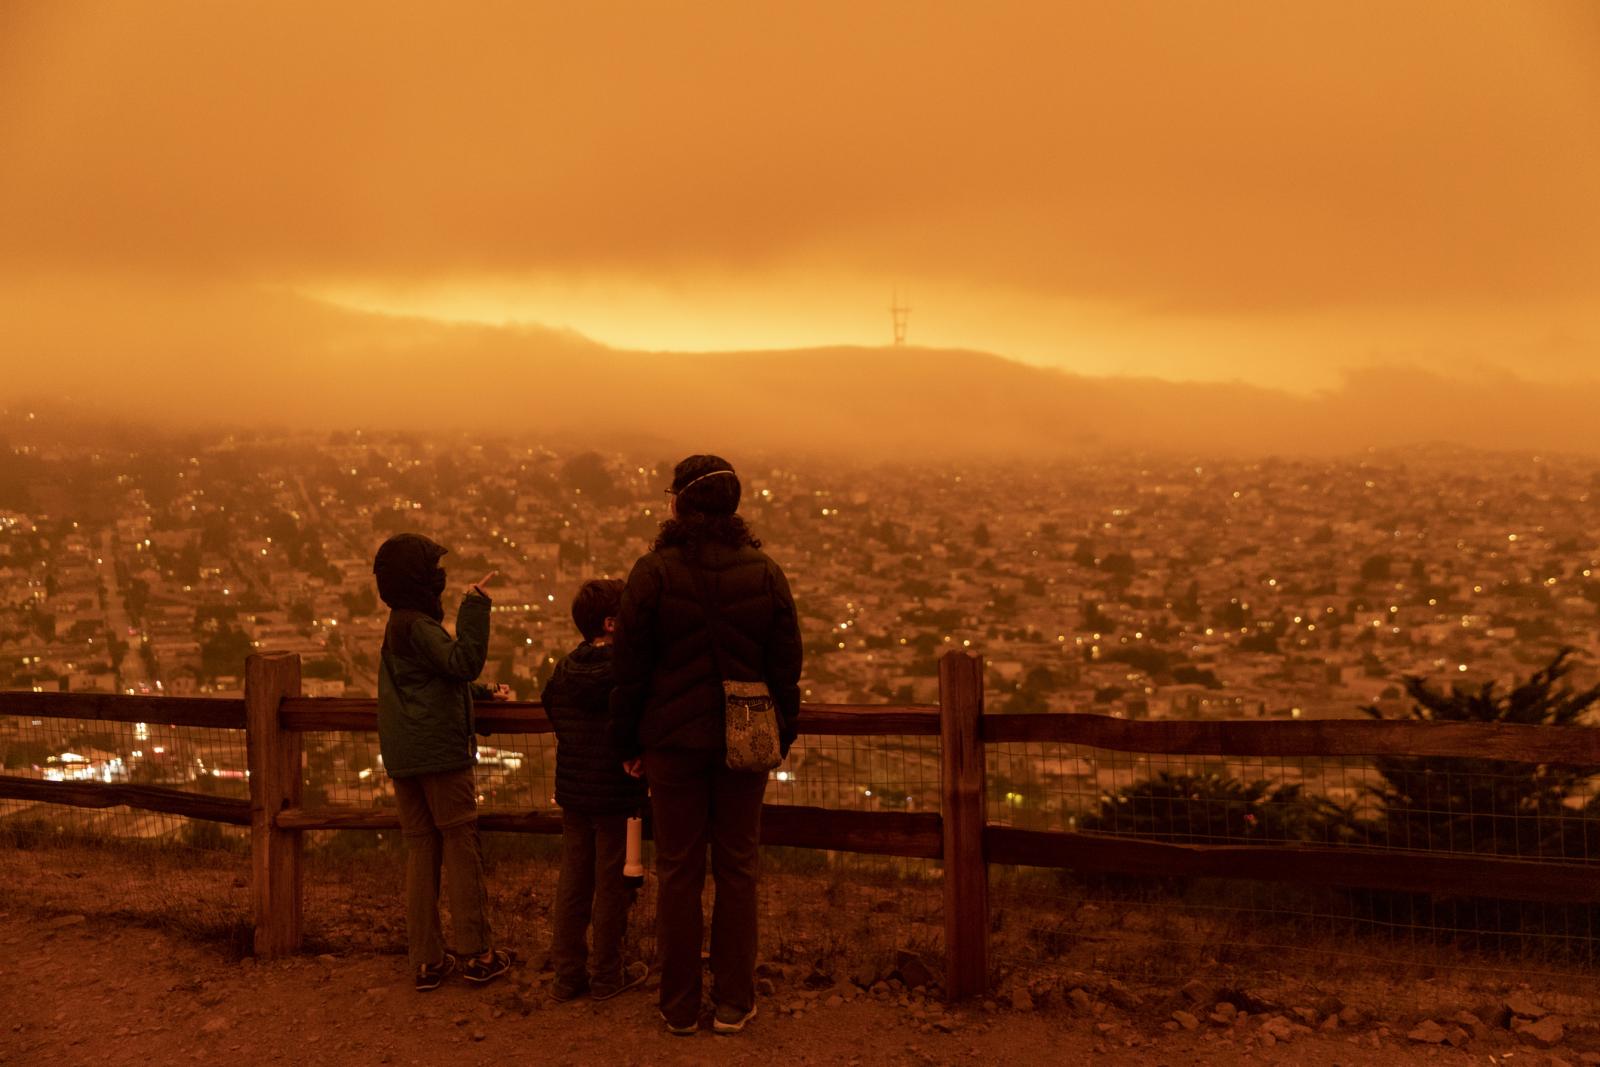 Adult and kids standing in orange smog wearing face masks